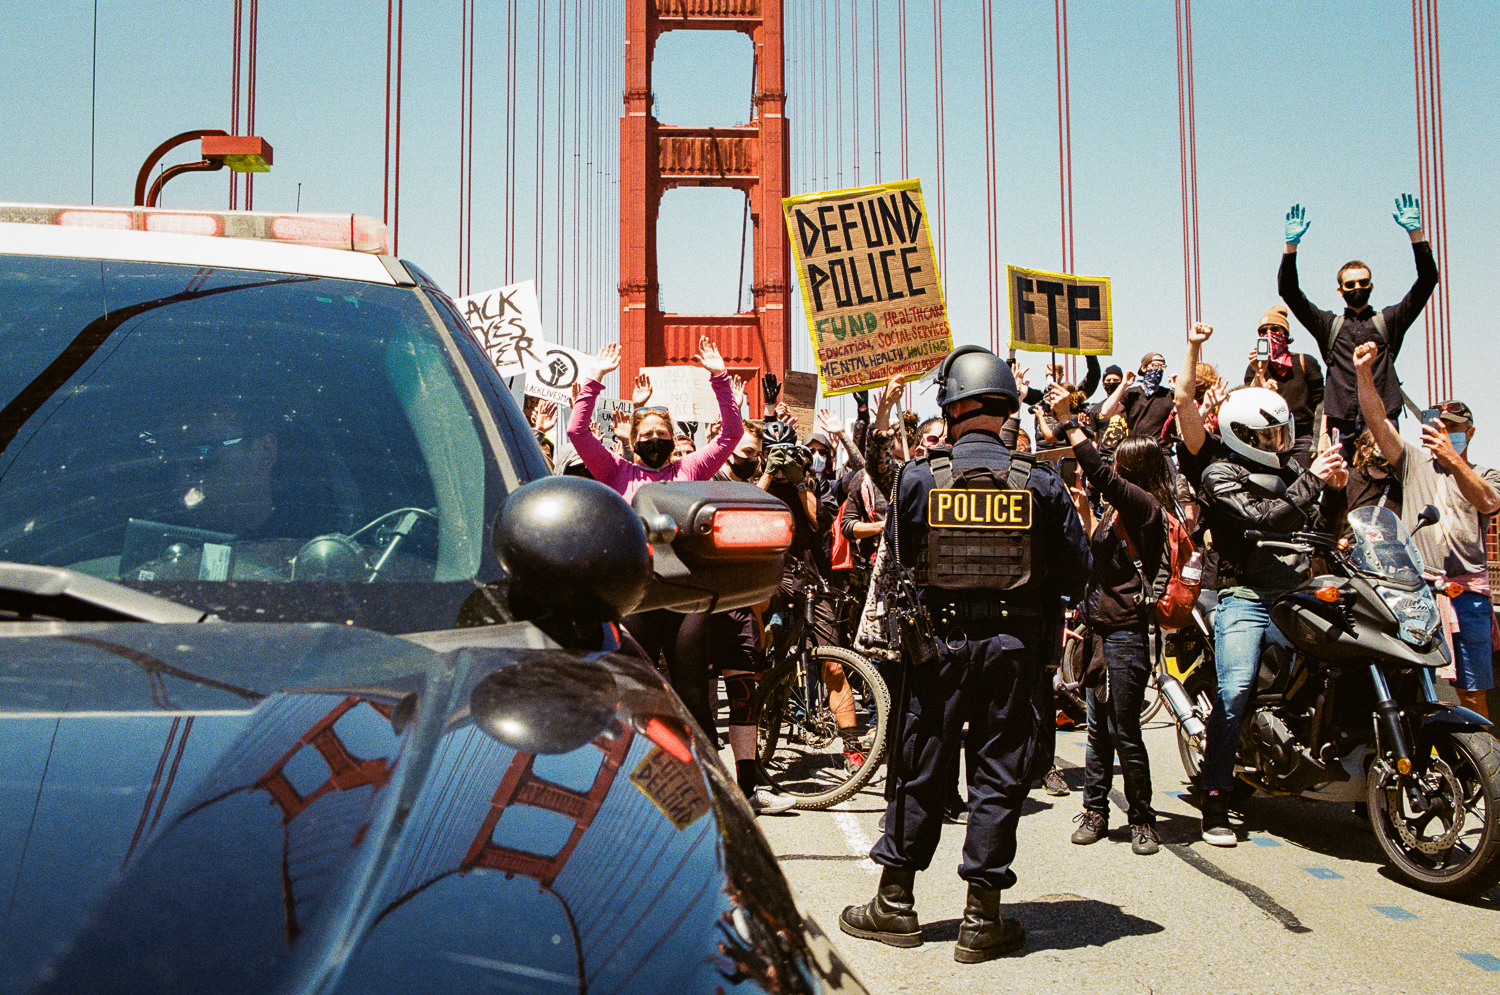 Protesters shut down the bridge to demand police reforms in the wake of the killing of George Floyd in June 2020.